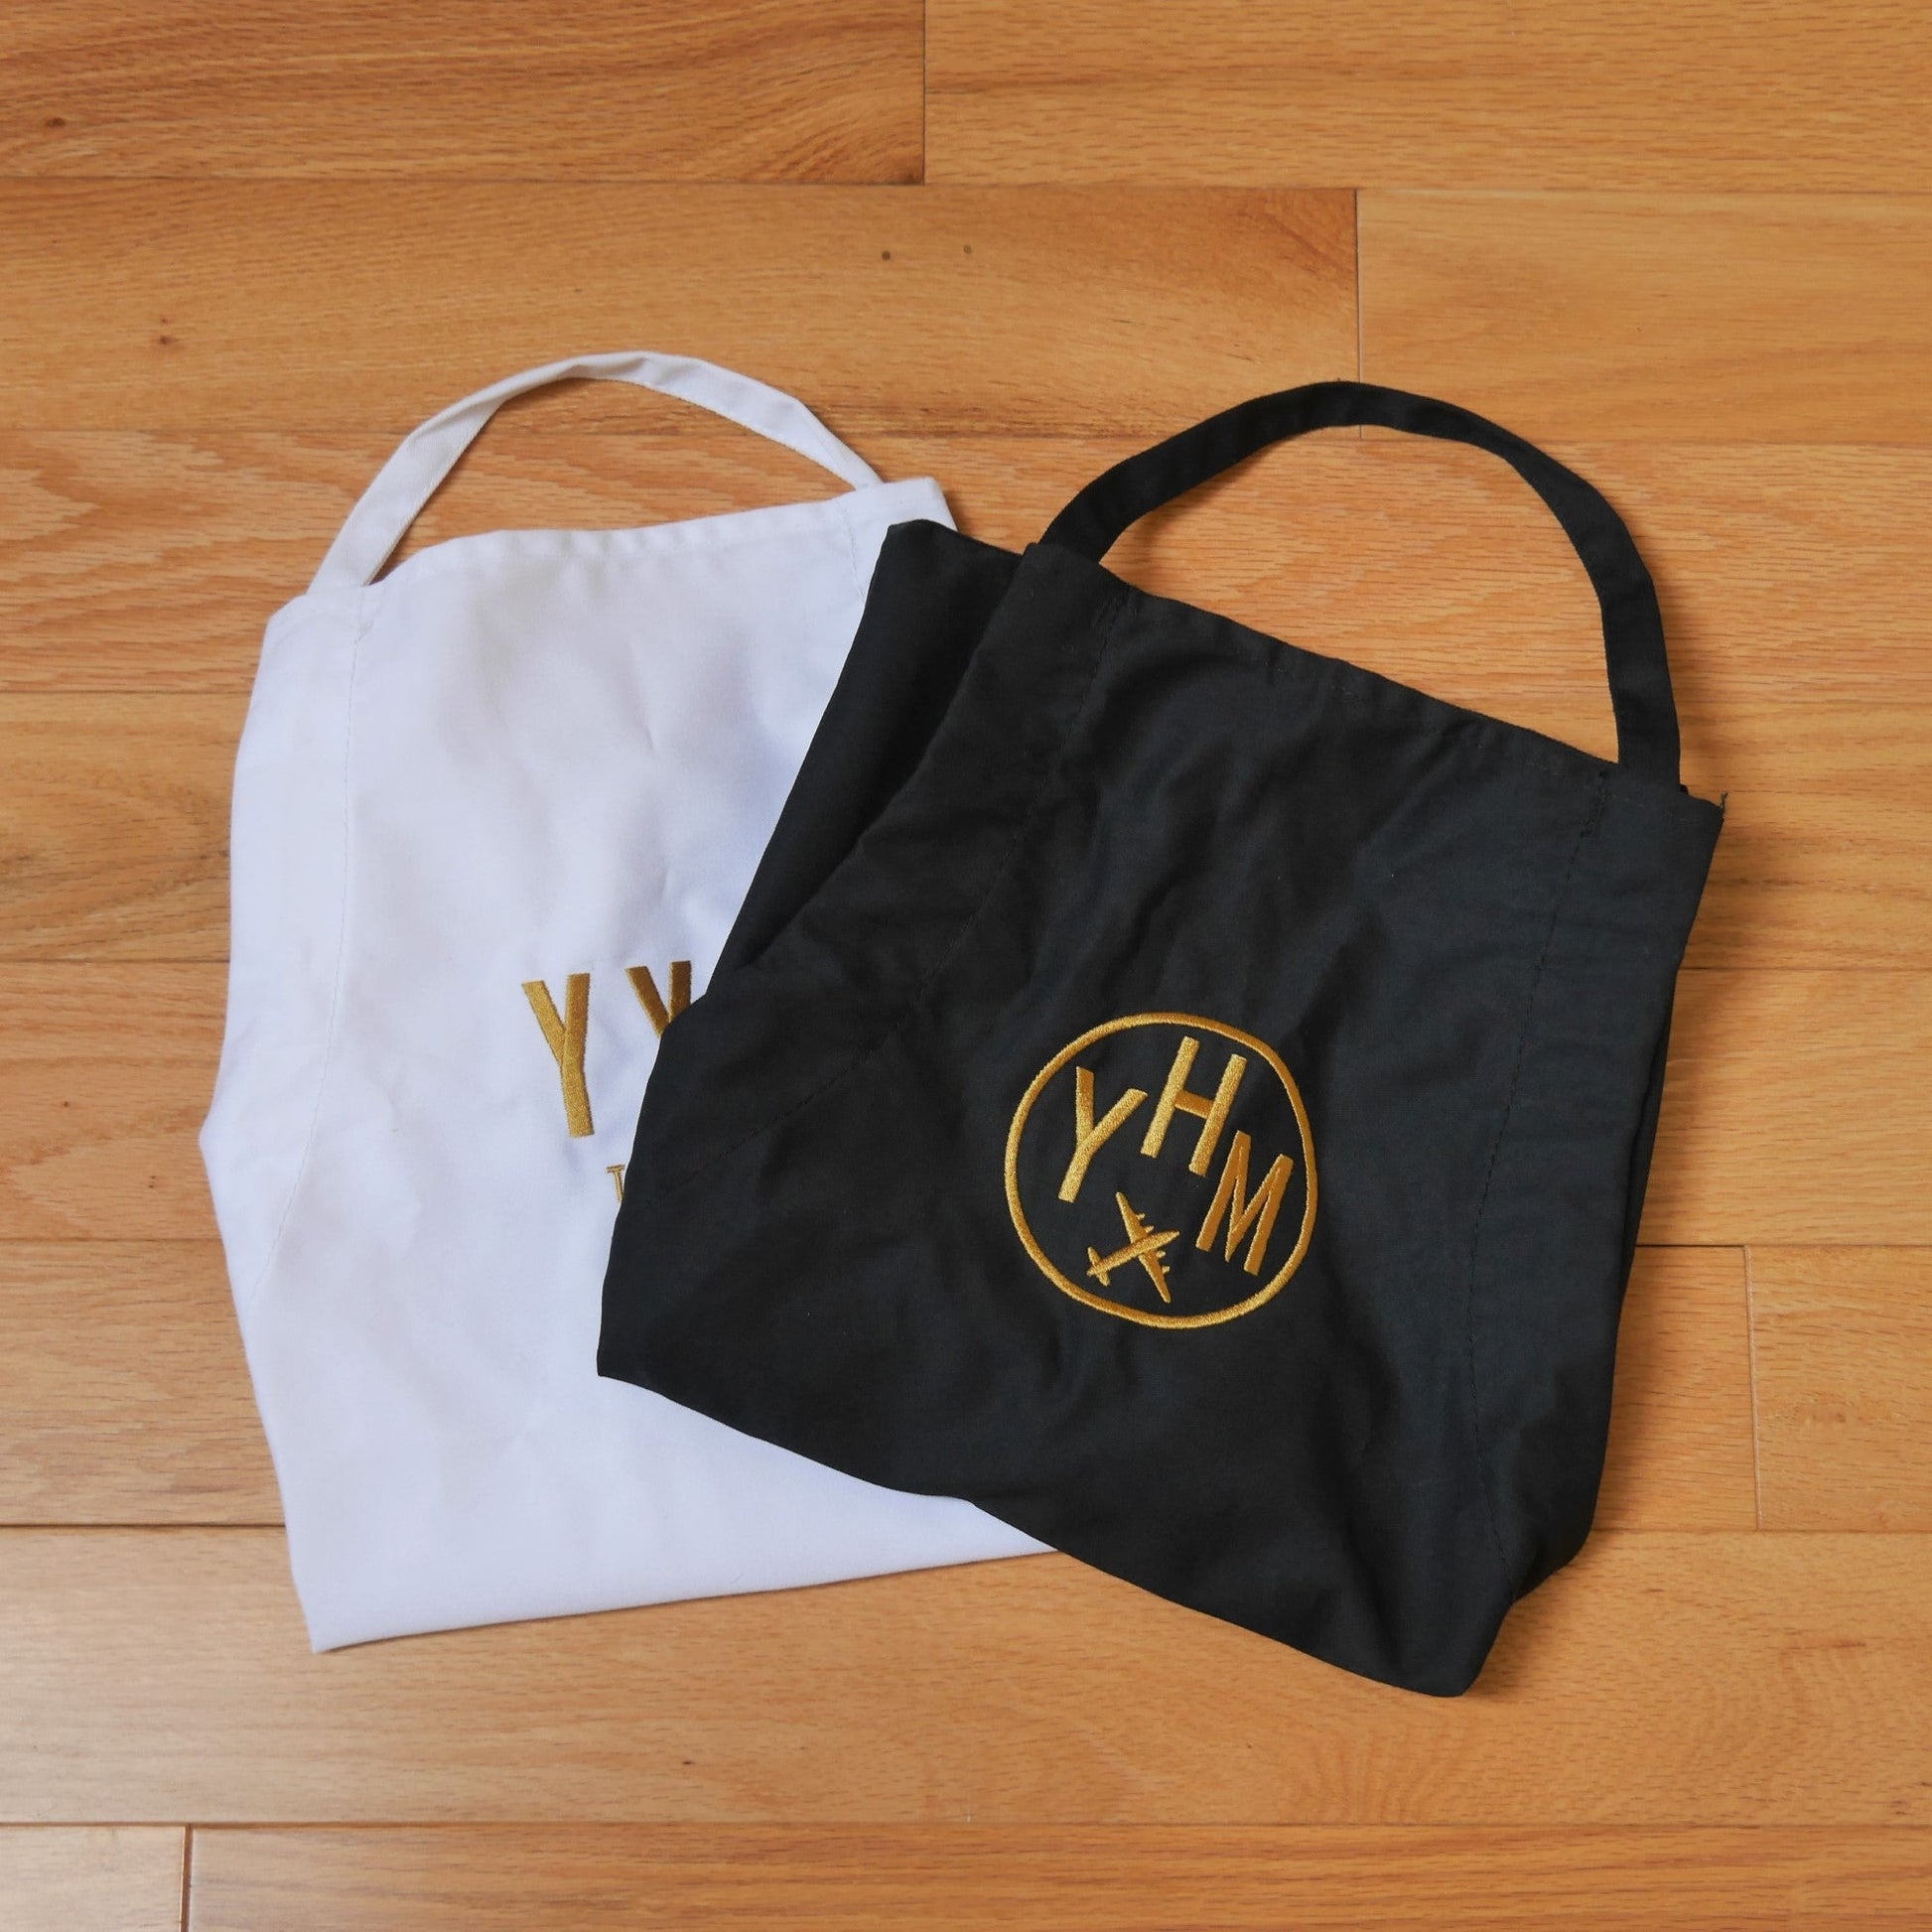 City Embroidered Apron - Old Gold • BCN Barcelona • YHM Designs - Image 14